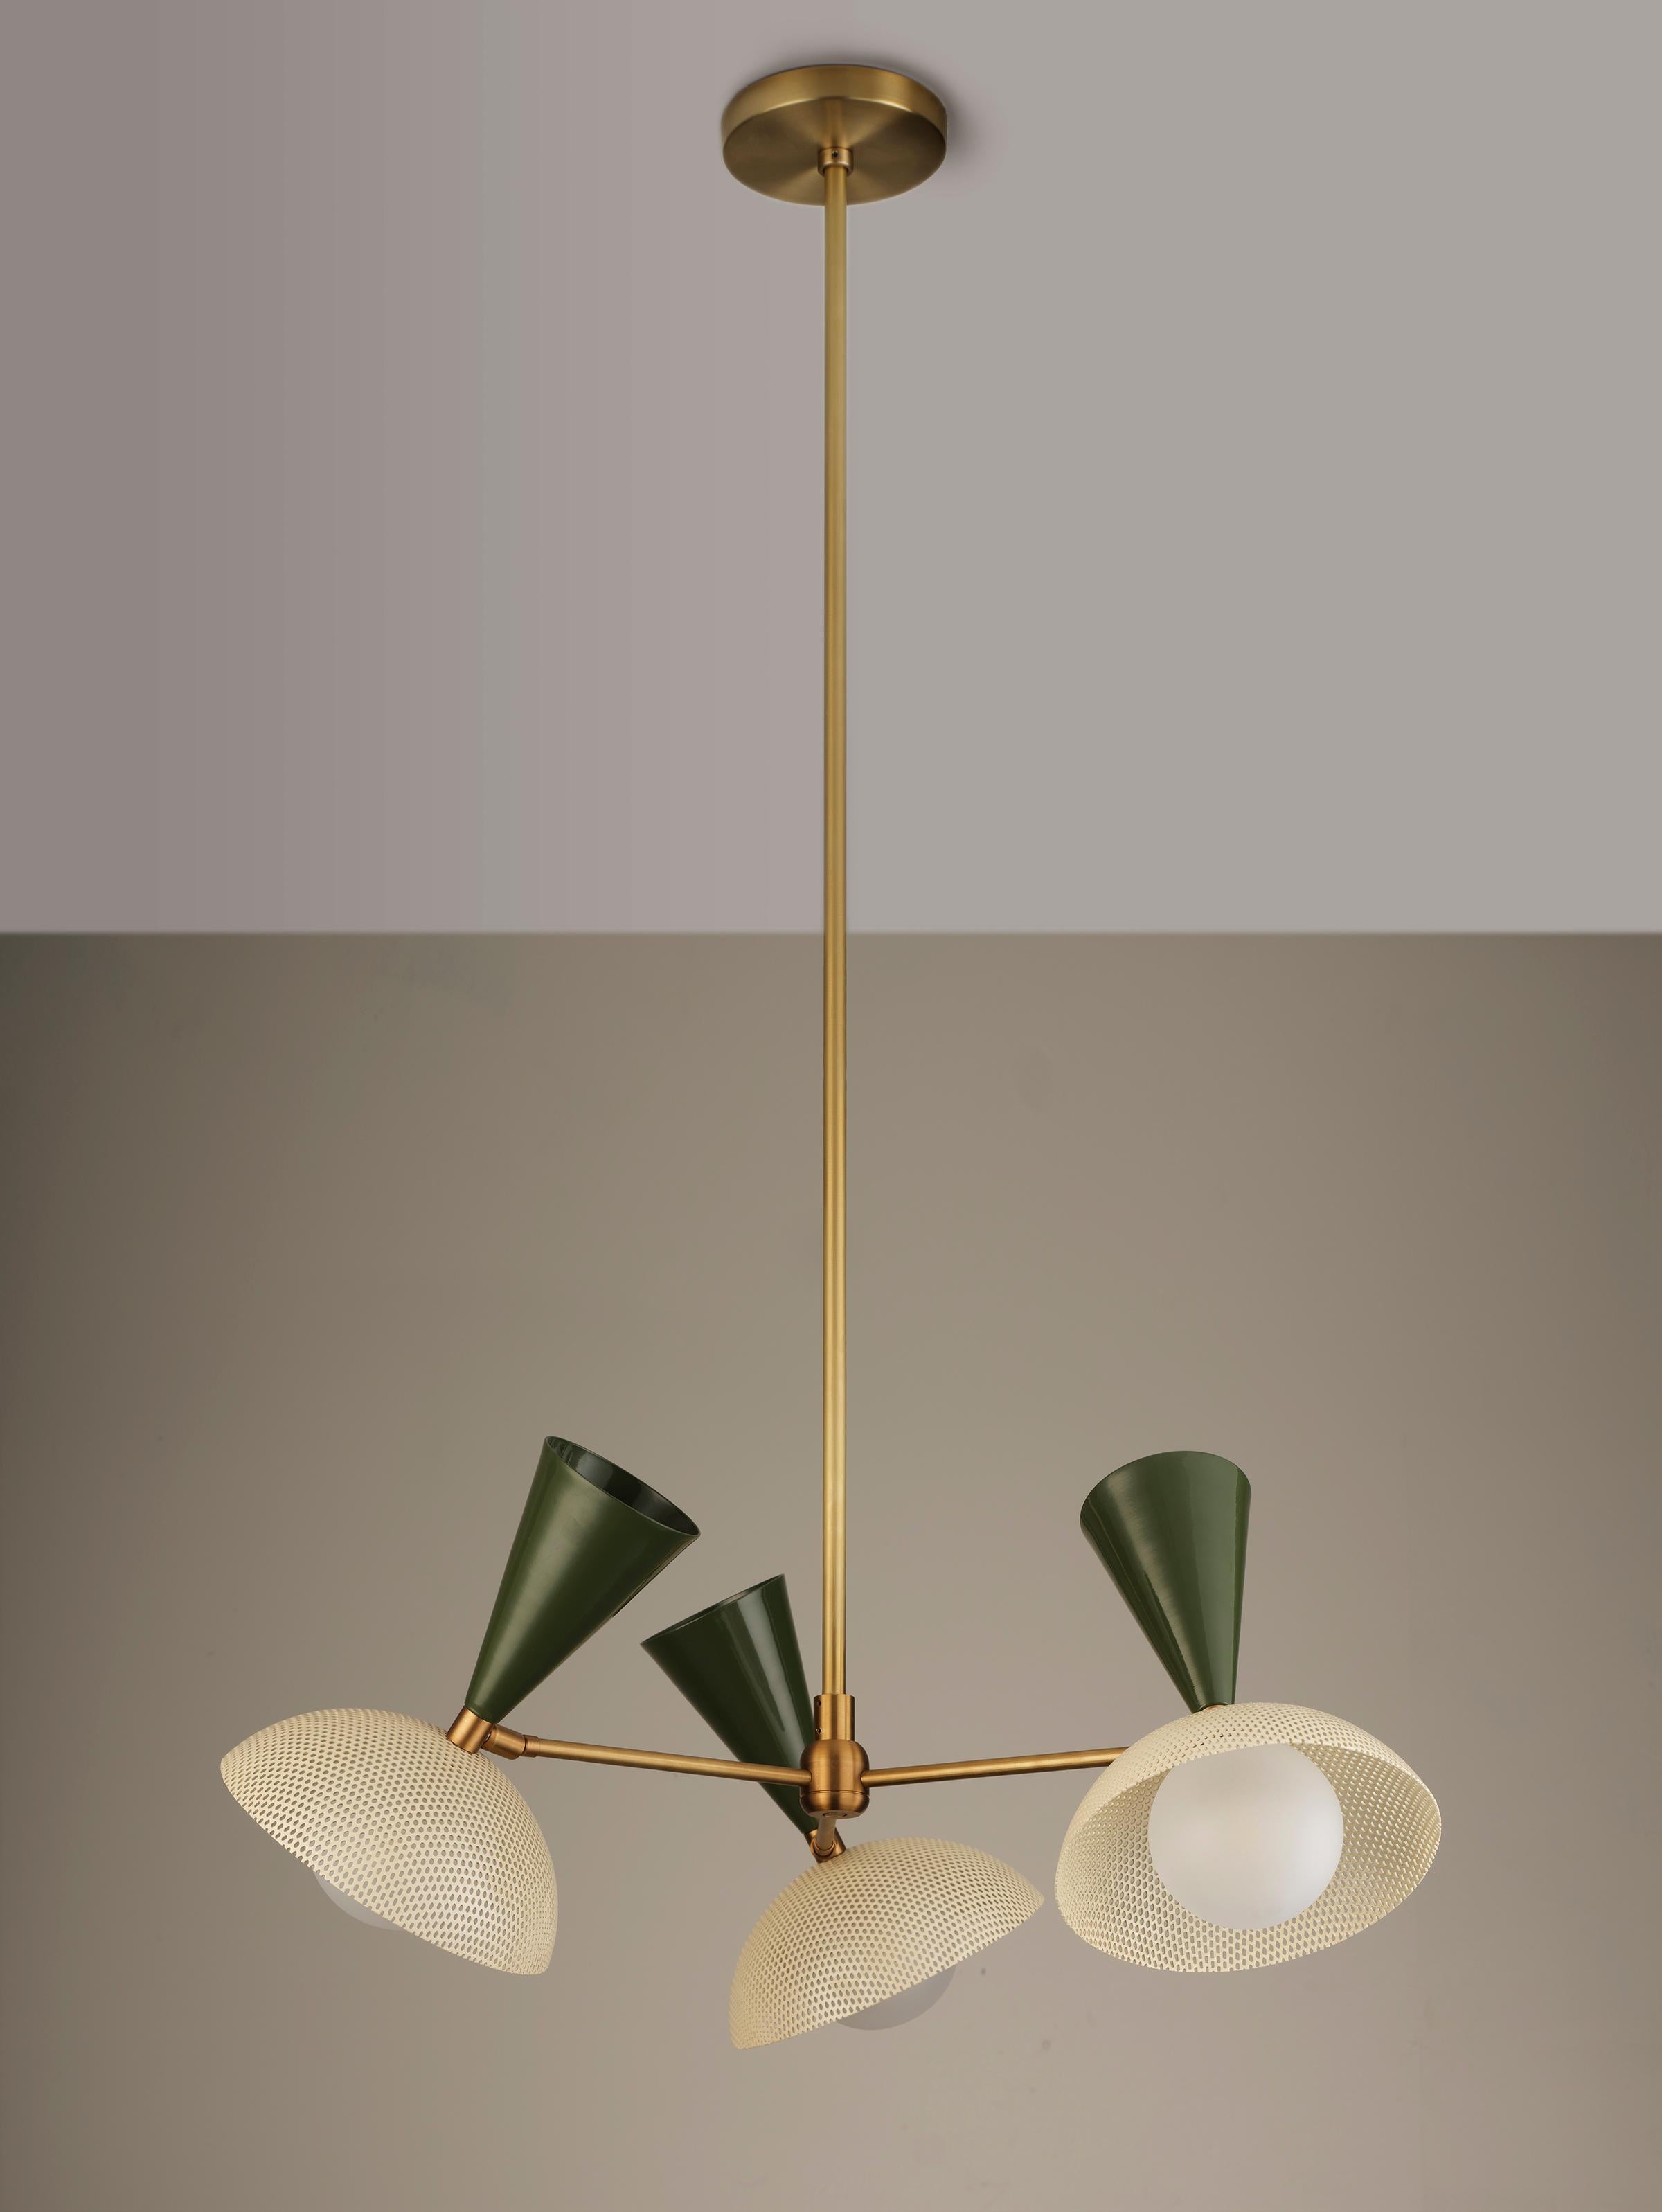 North American Molto 3-Arm Ceiling Pendant in Natural Brass + Enameled Mesh, Blueprint Lighting For Sale